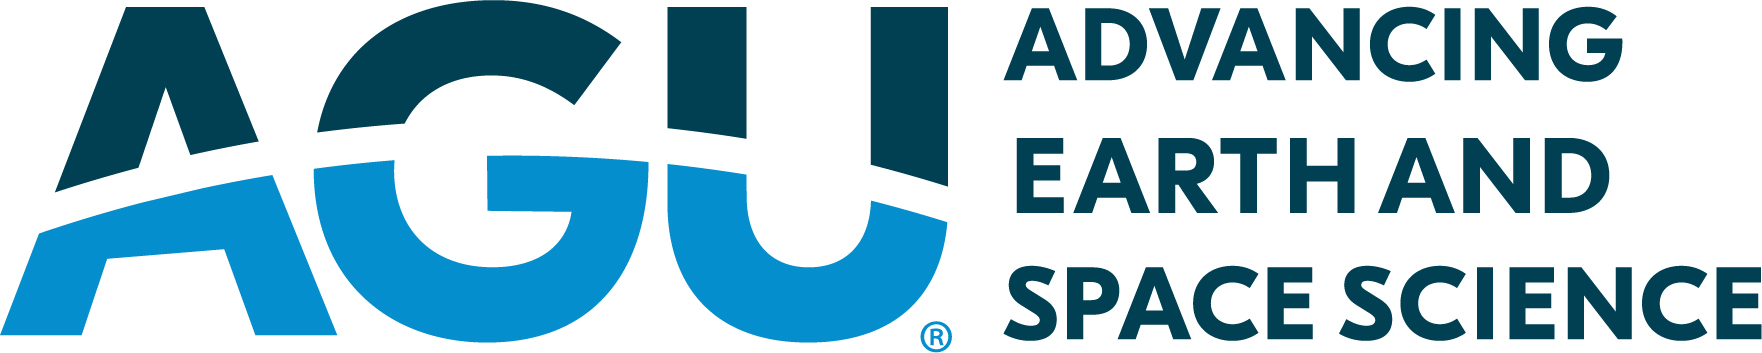 AGU: Advancing Earth and Space Science trademarked logo